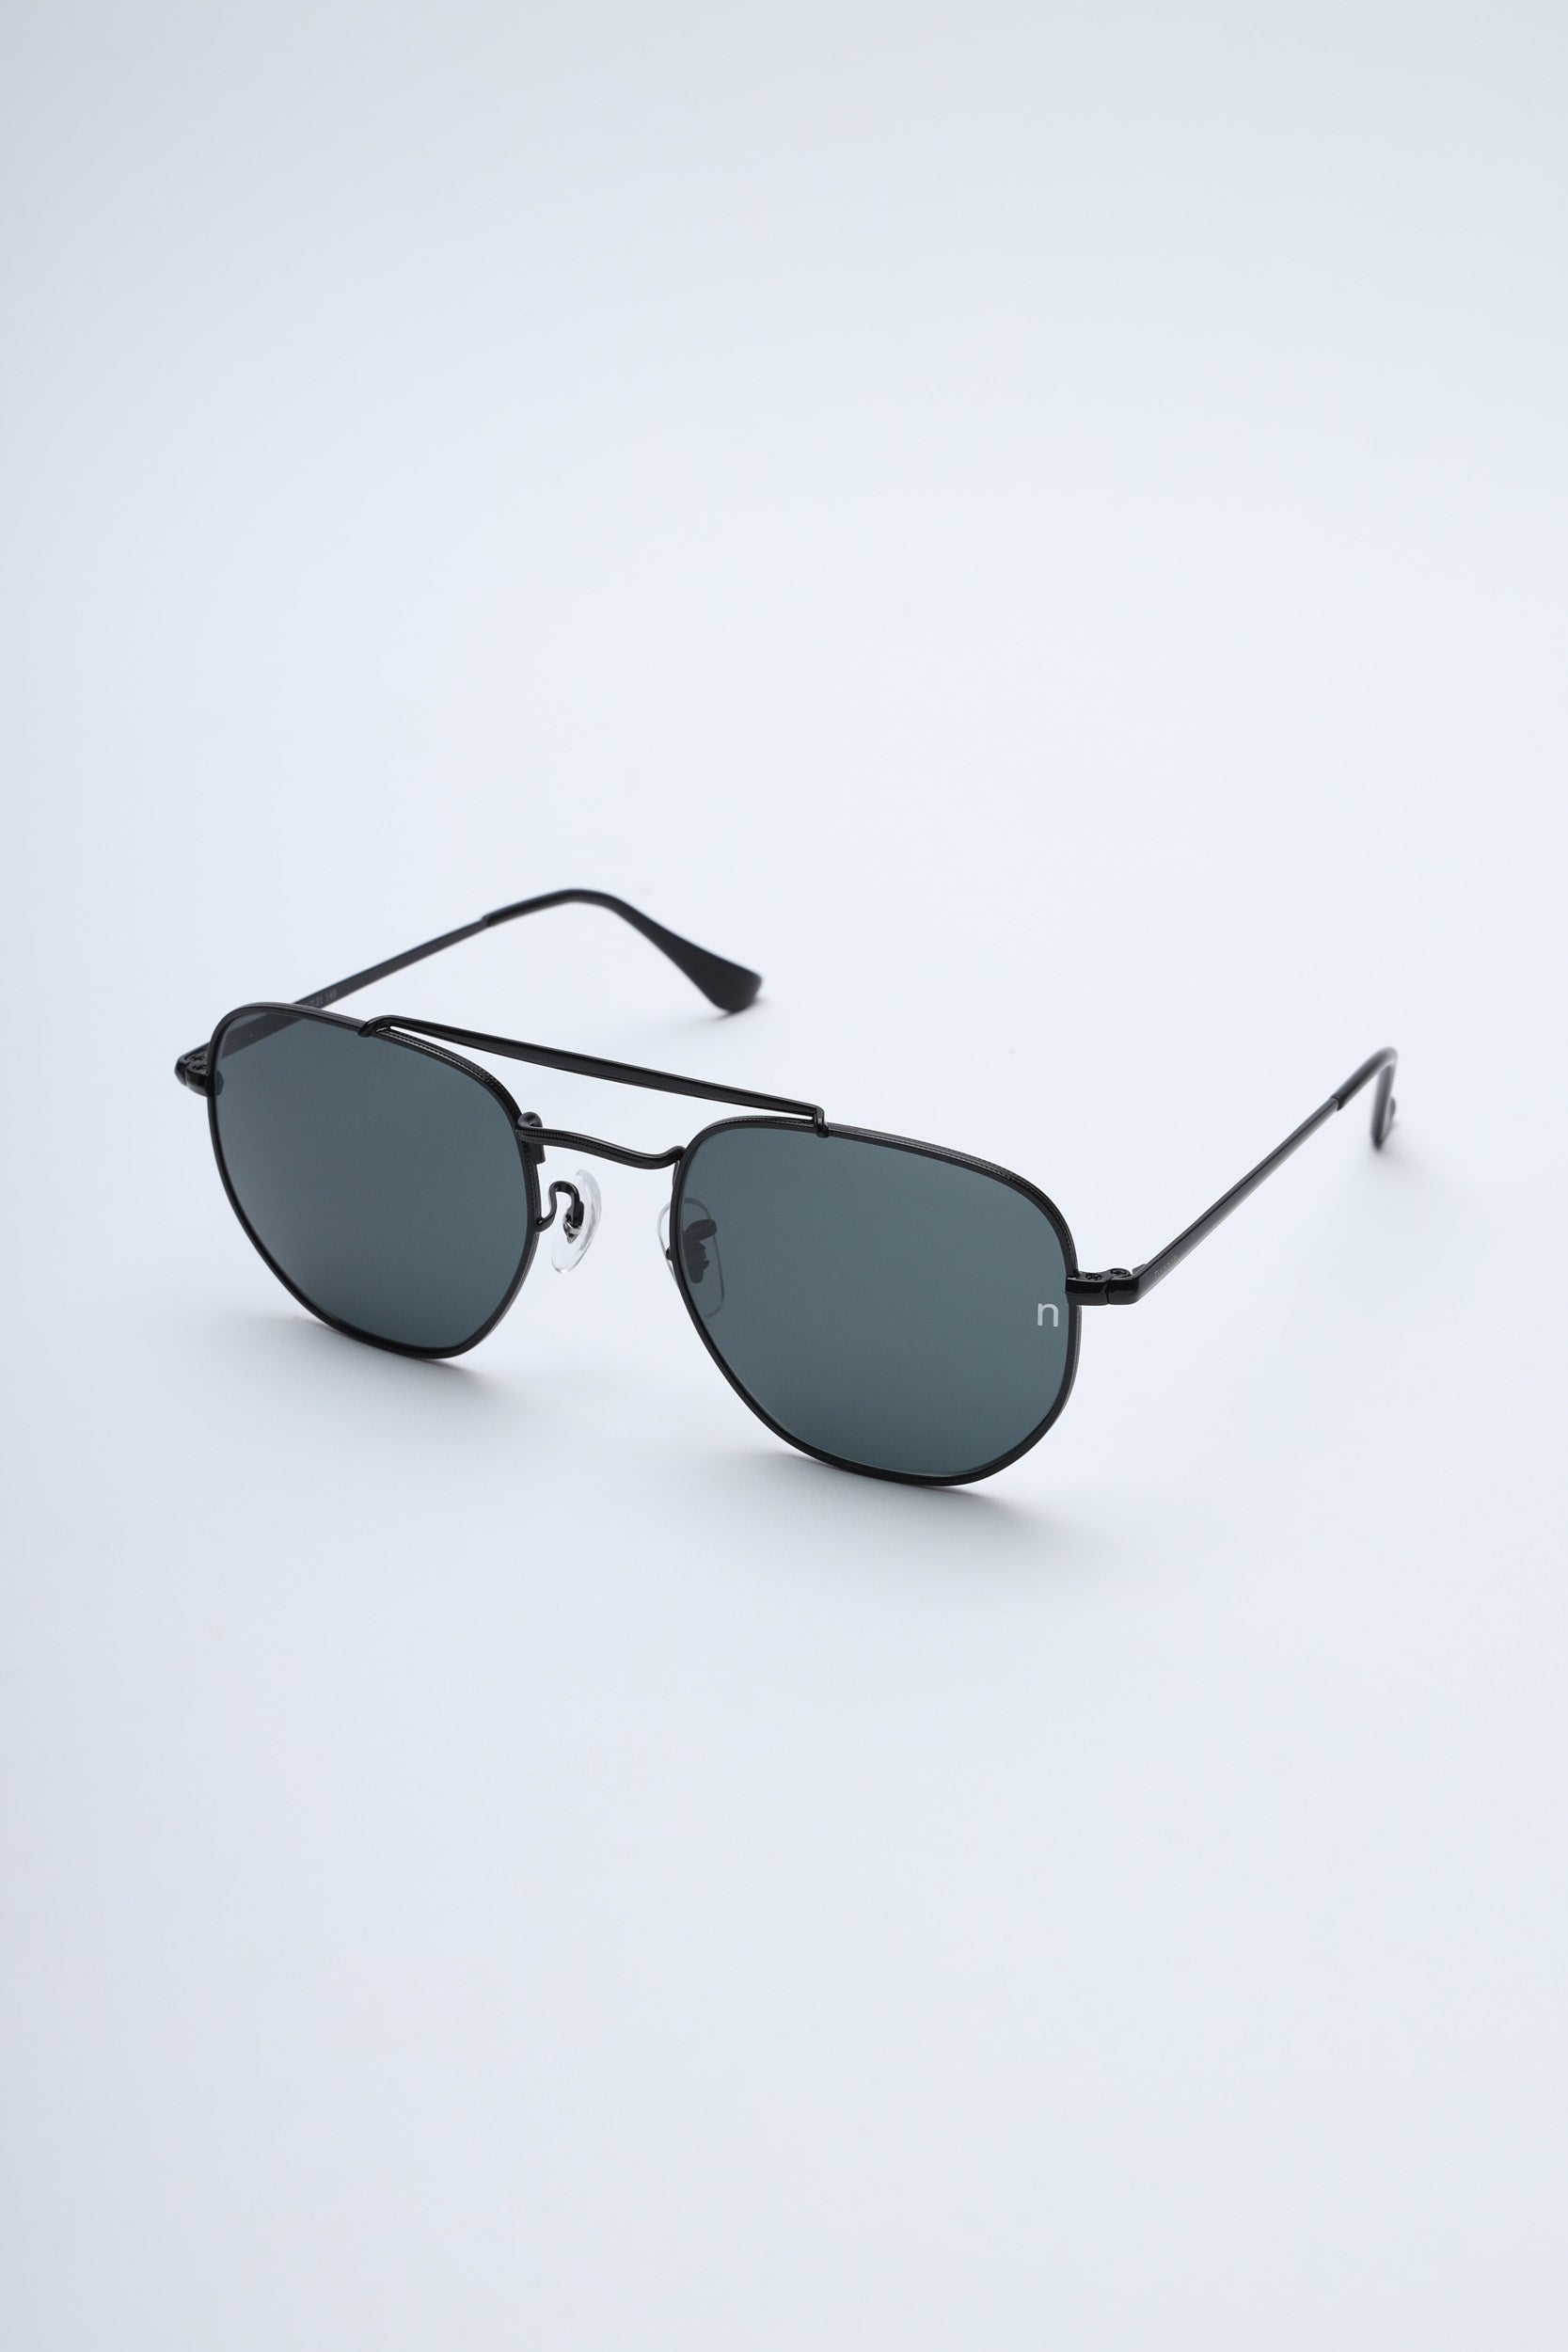 NS2007BFBL Stainless Steel Black Frame with Black Glass Lens Sunglasses